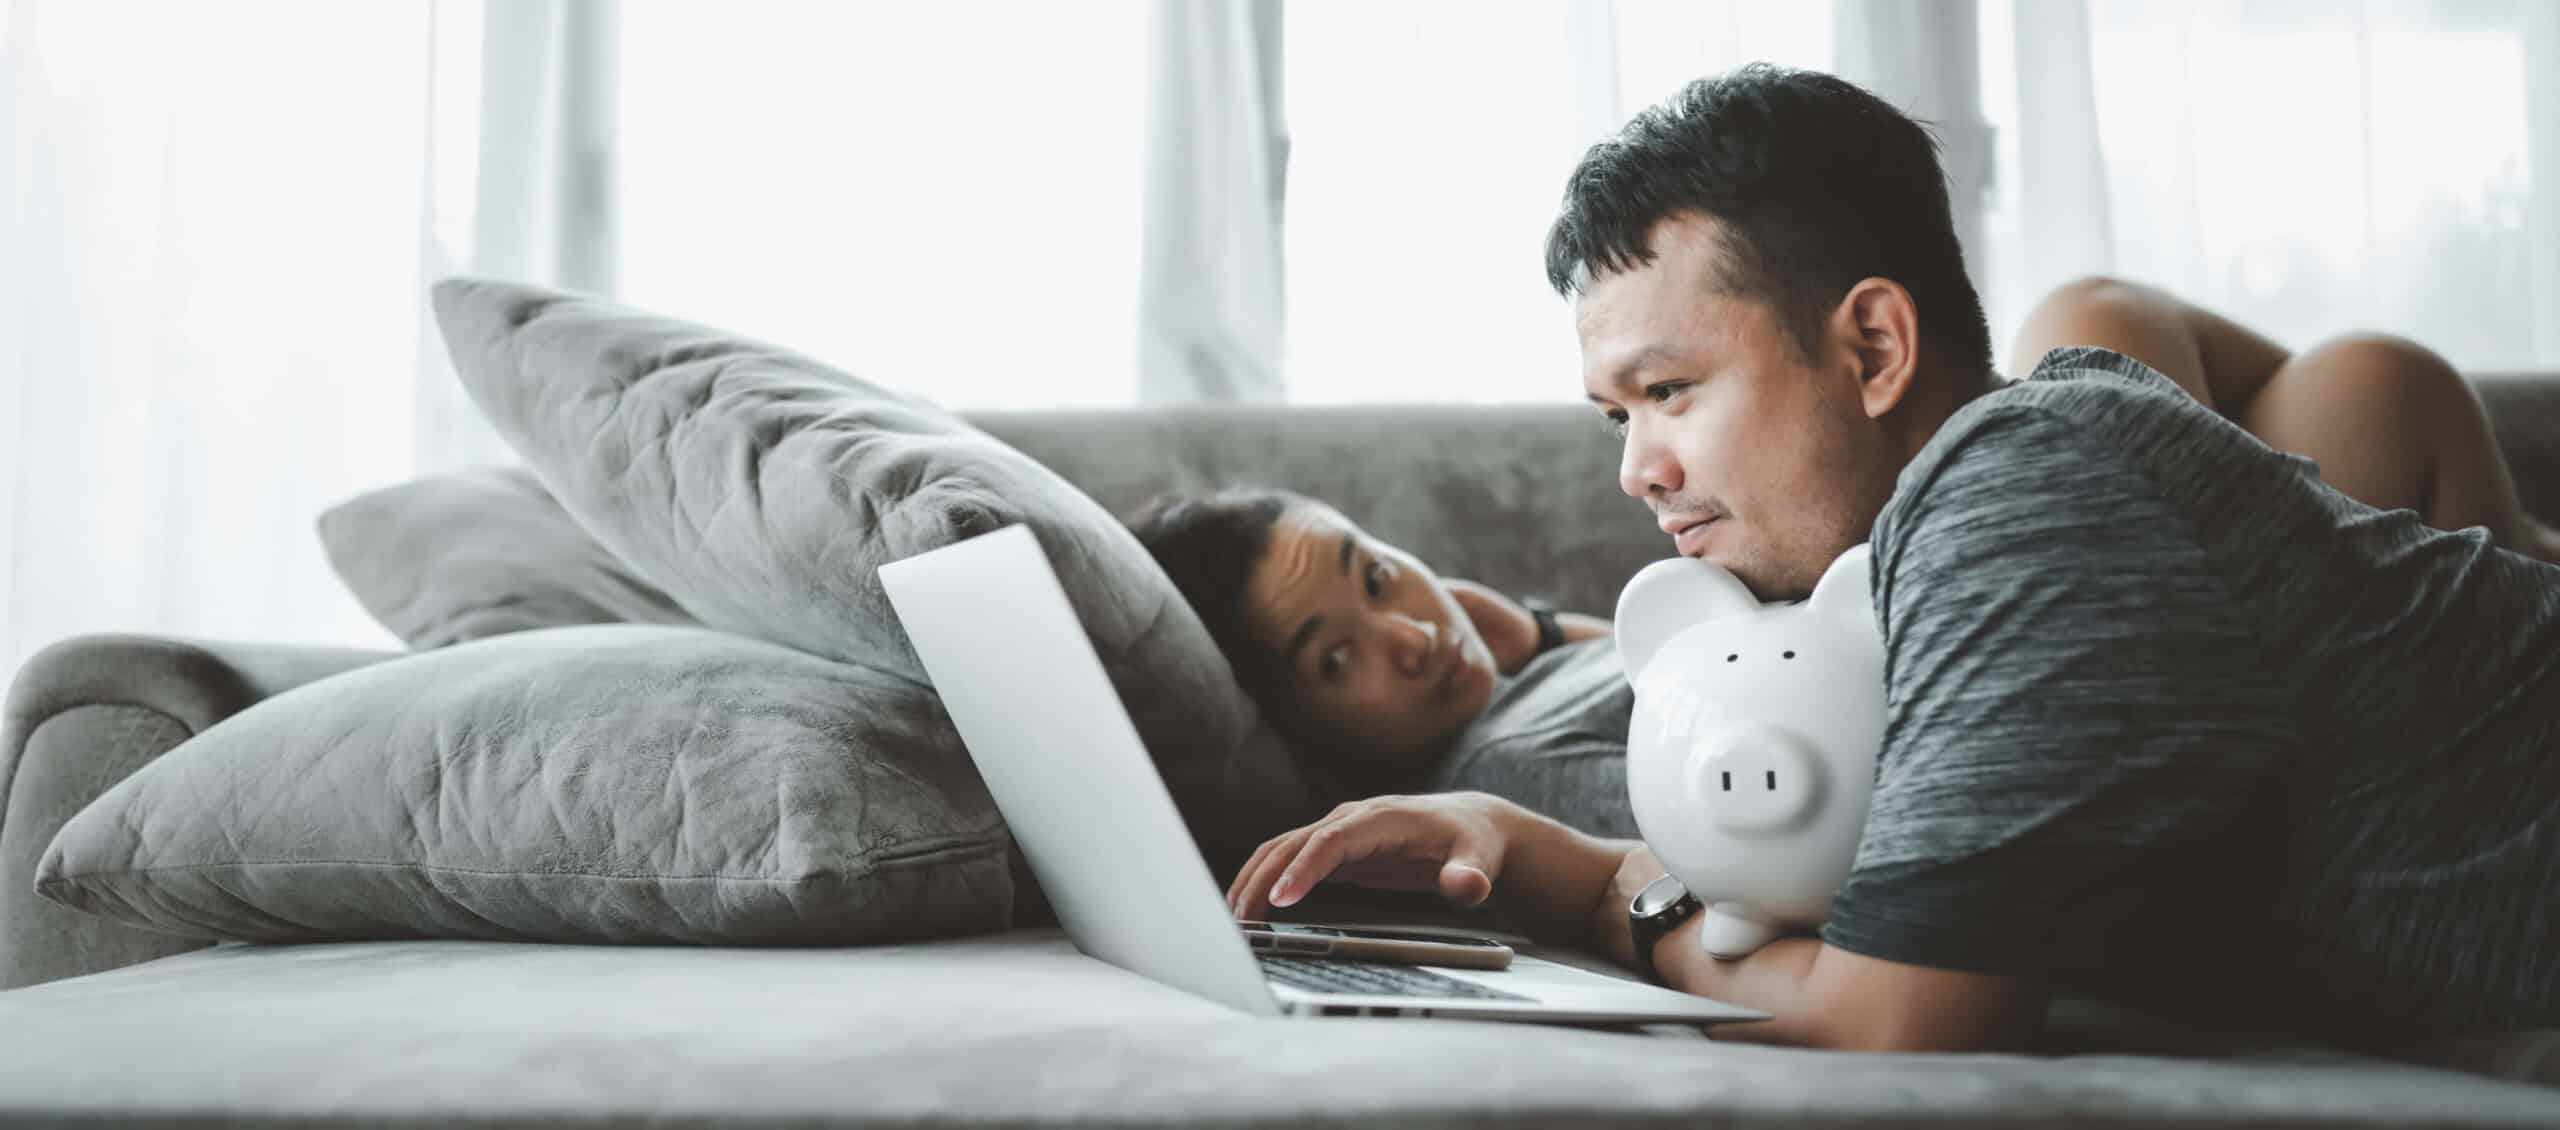 Asian man lying on the couch working on a budget spreadsheet while holding a piggy bank.